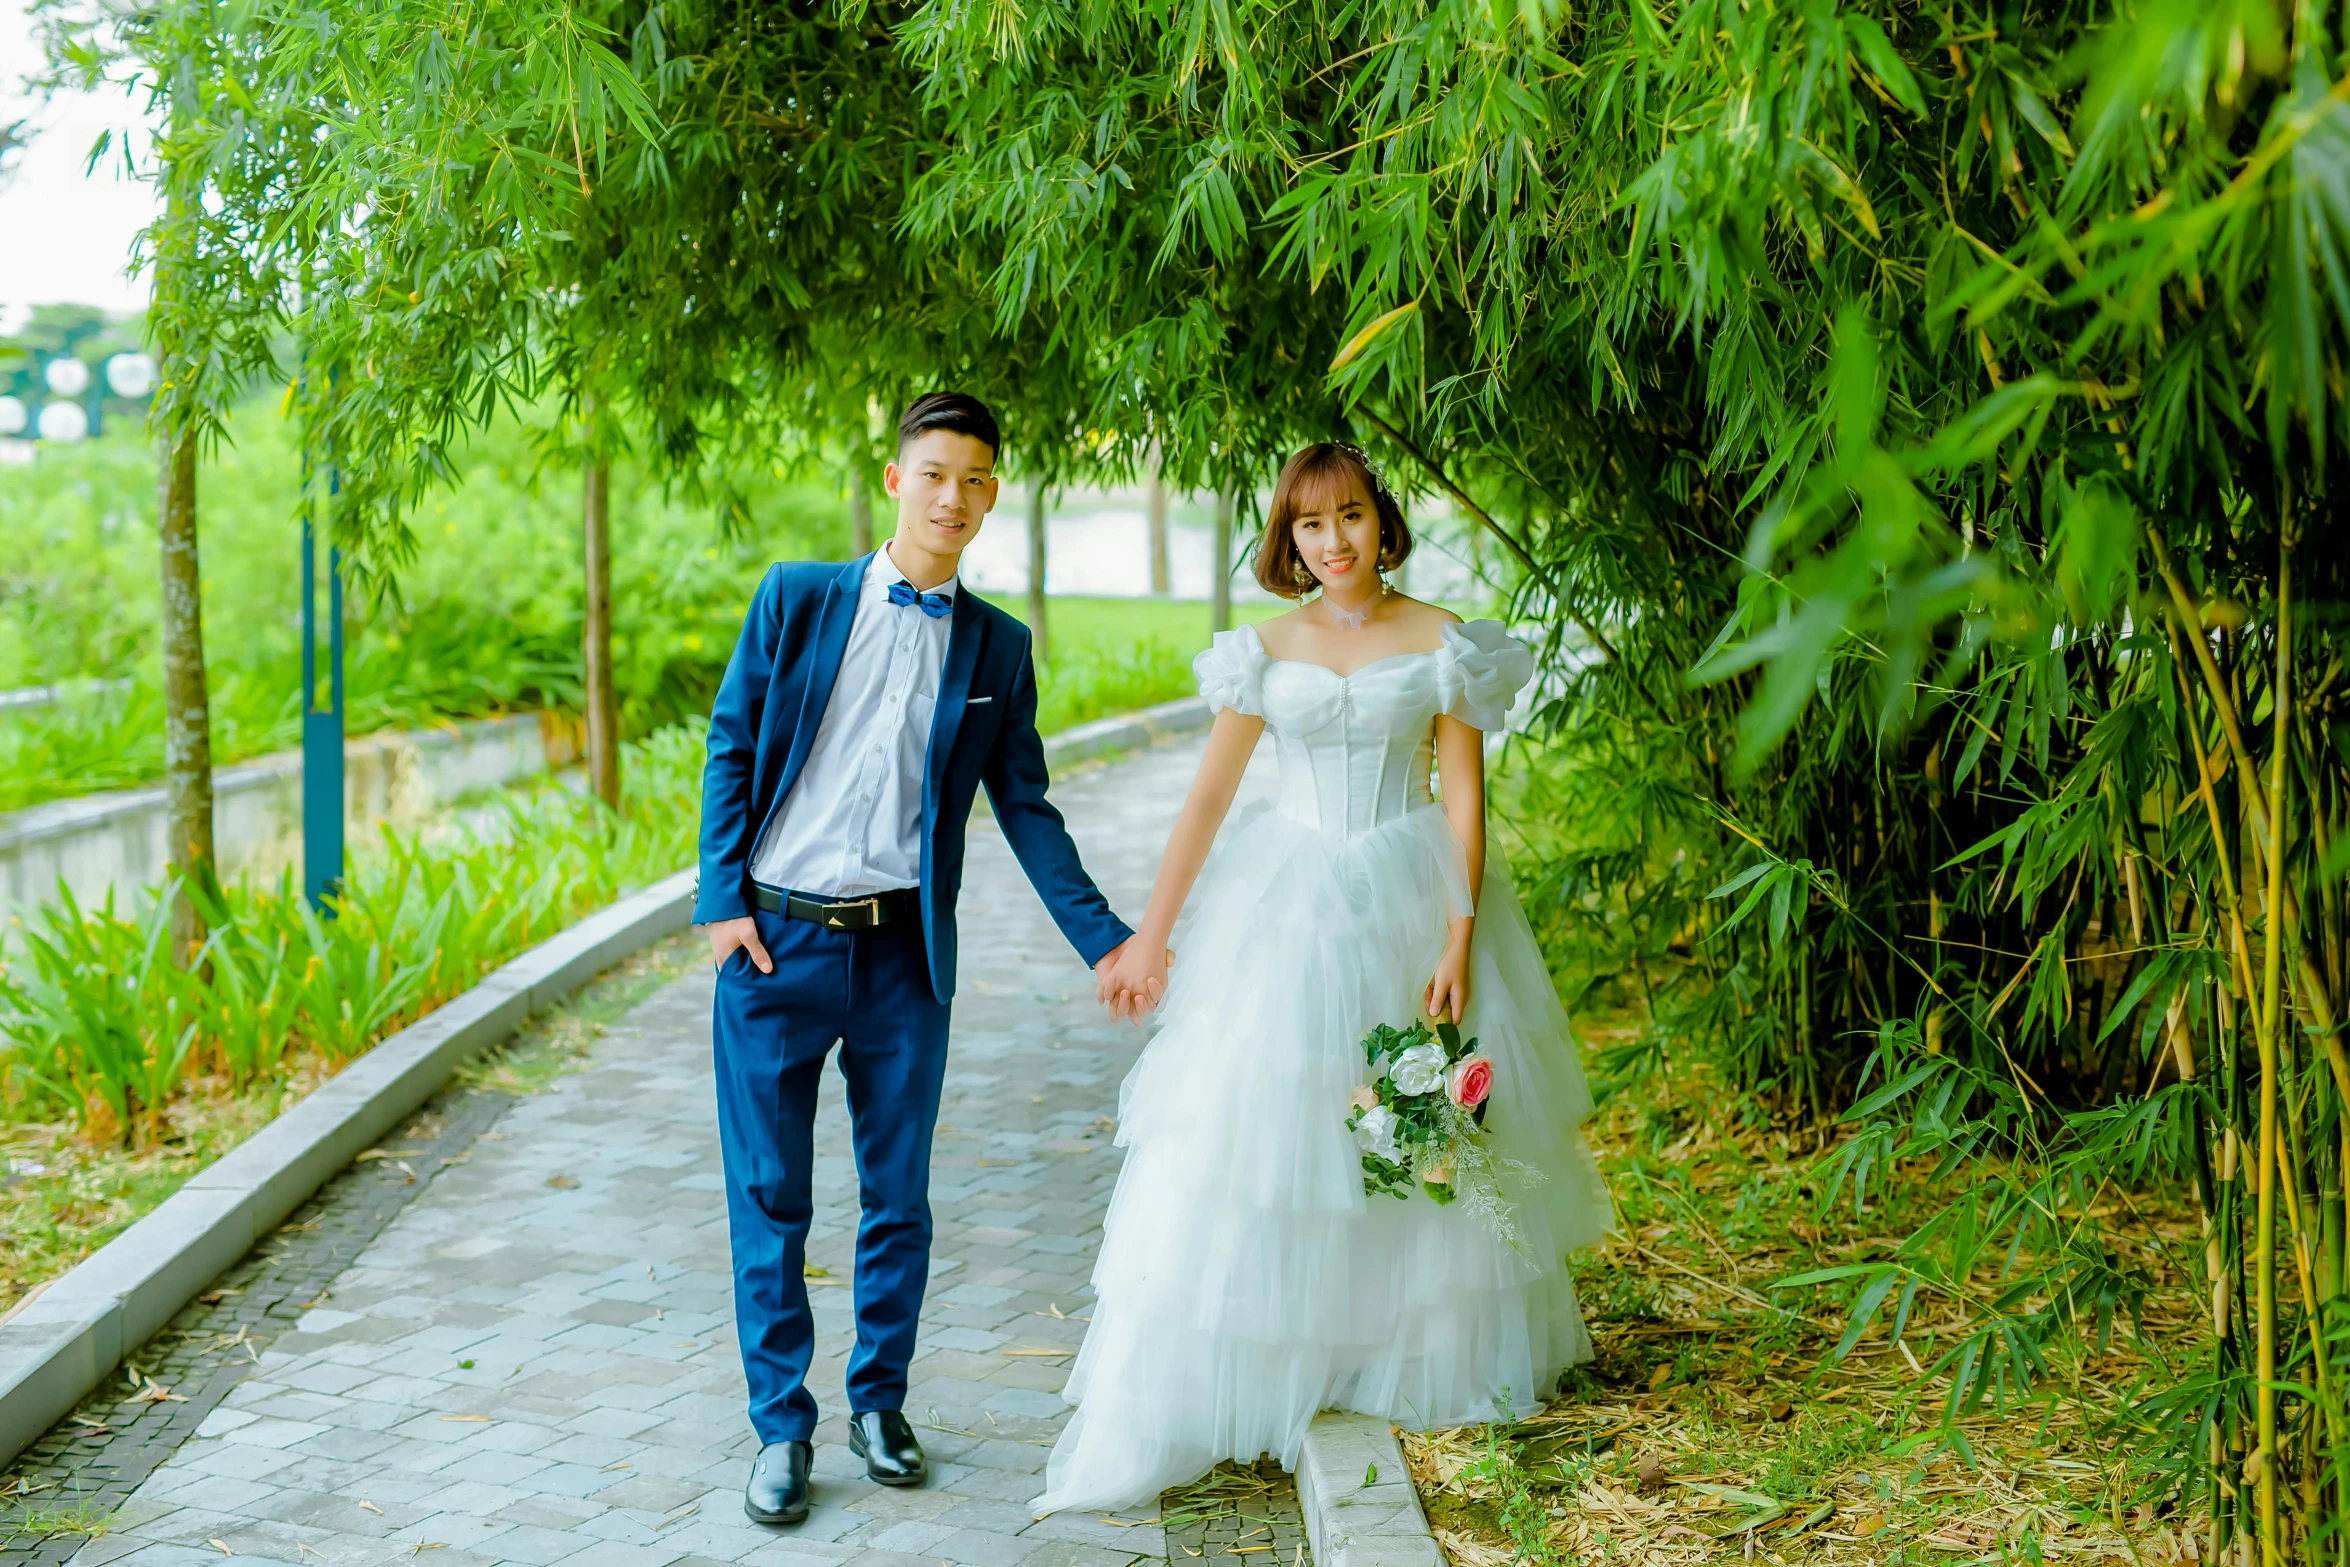 a beautiful young bride and groom walking down a path